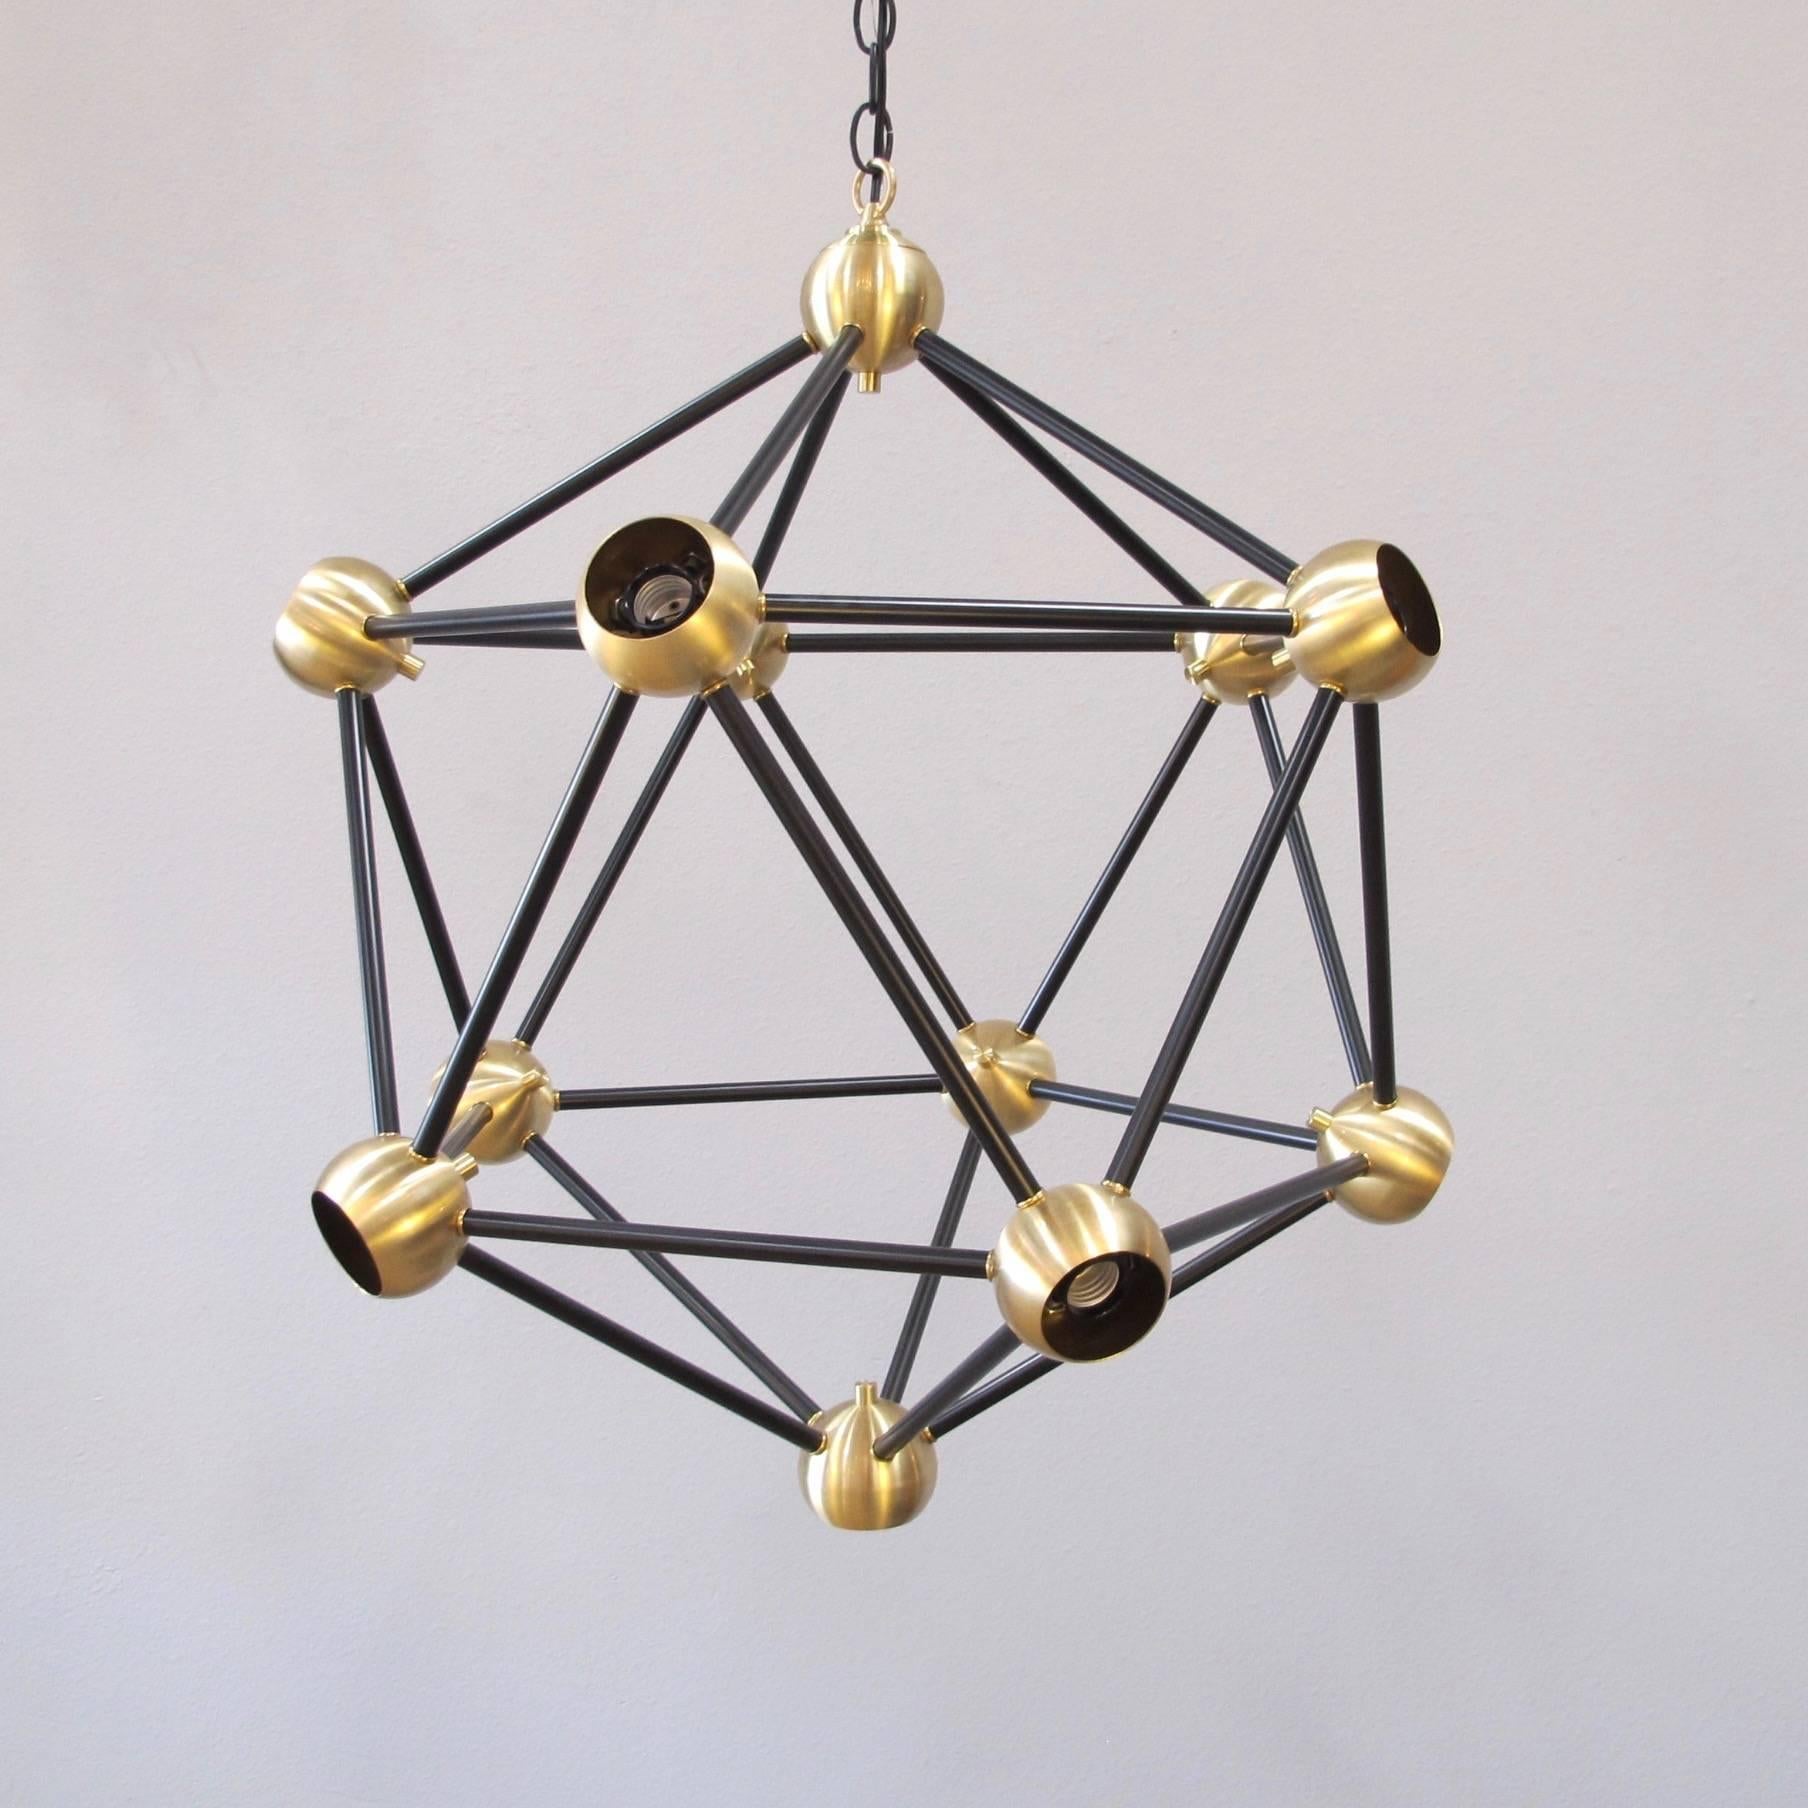 ON SALE!  Black and Brass Pendant Light In Excellent Condition For Sale In Encinitas, CA